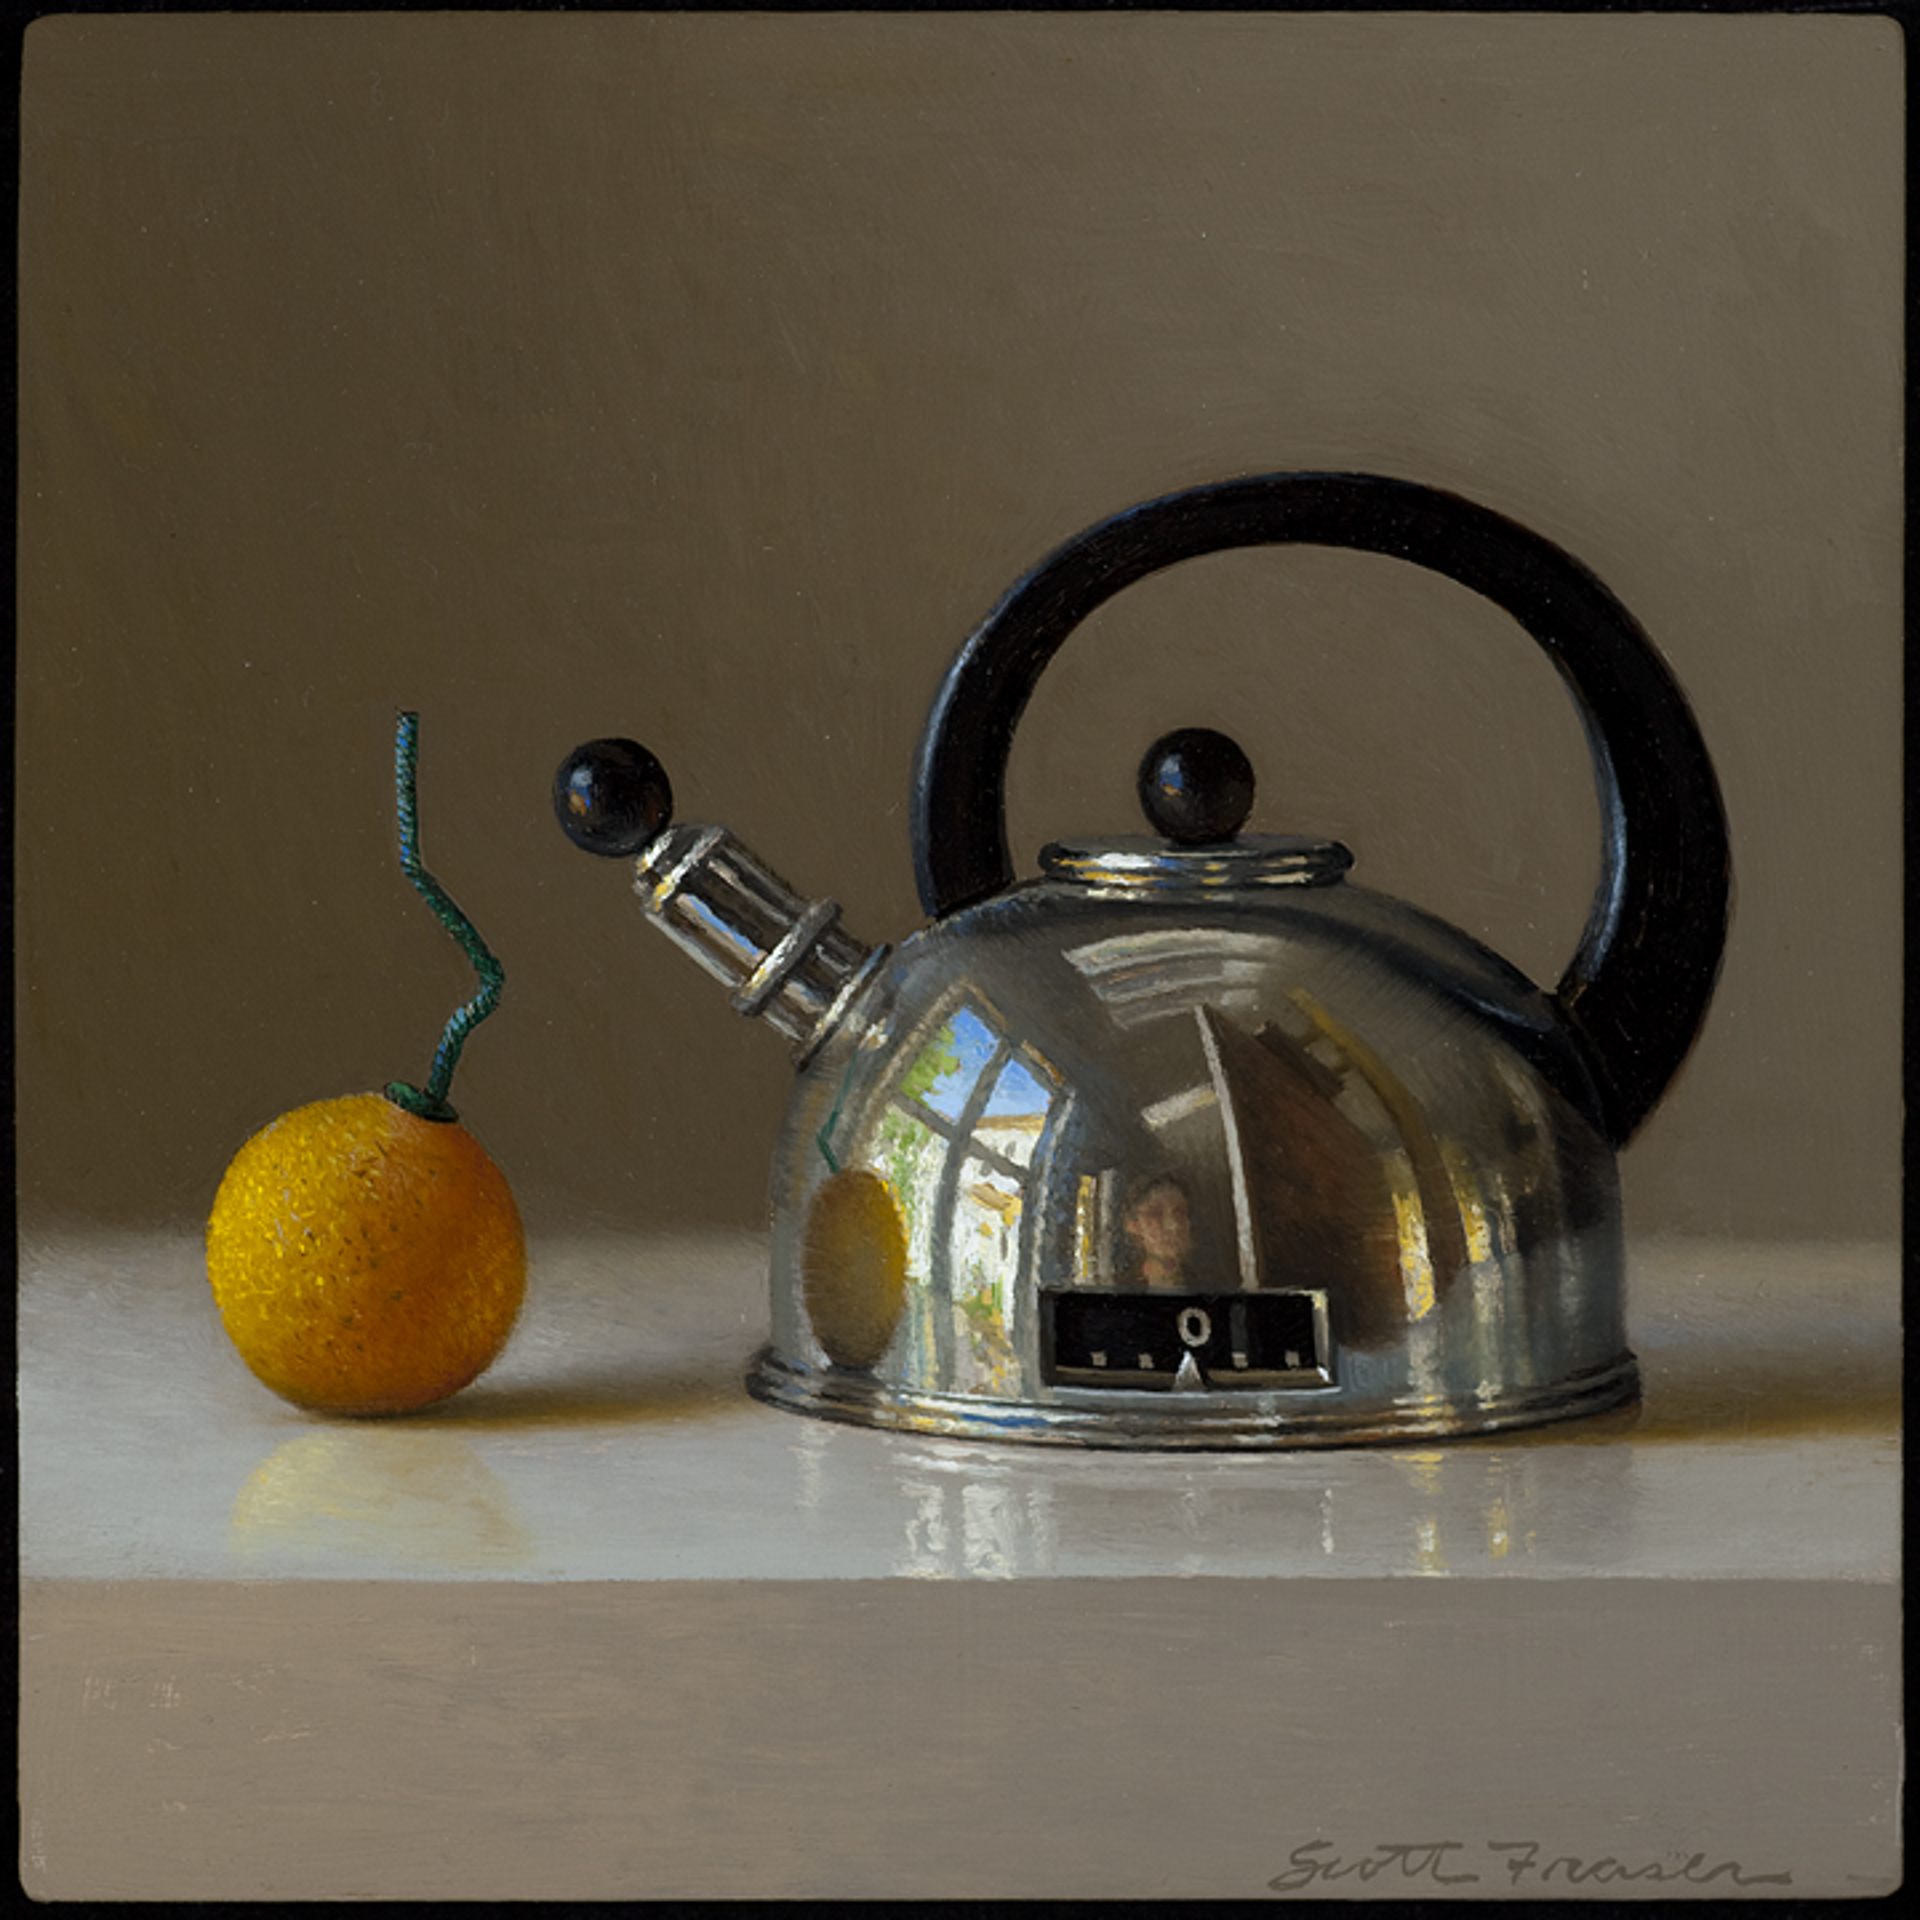 Teapot with Smokebomb by Scott Fraser